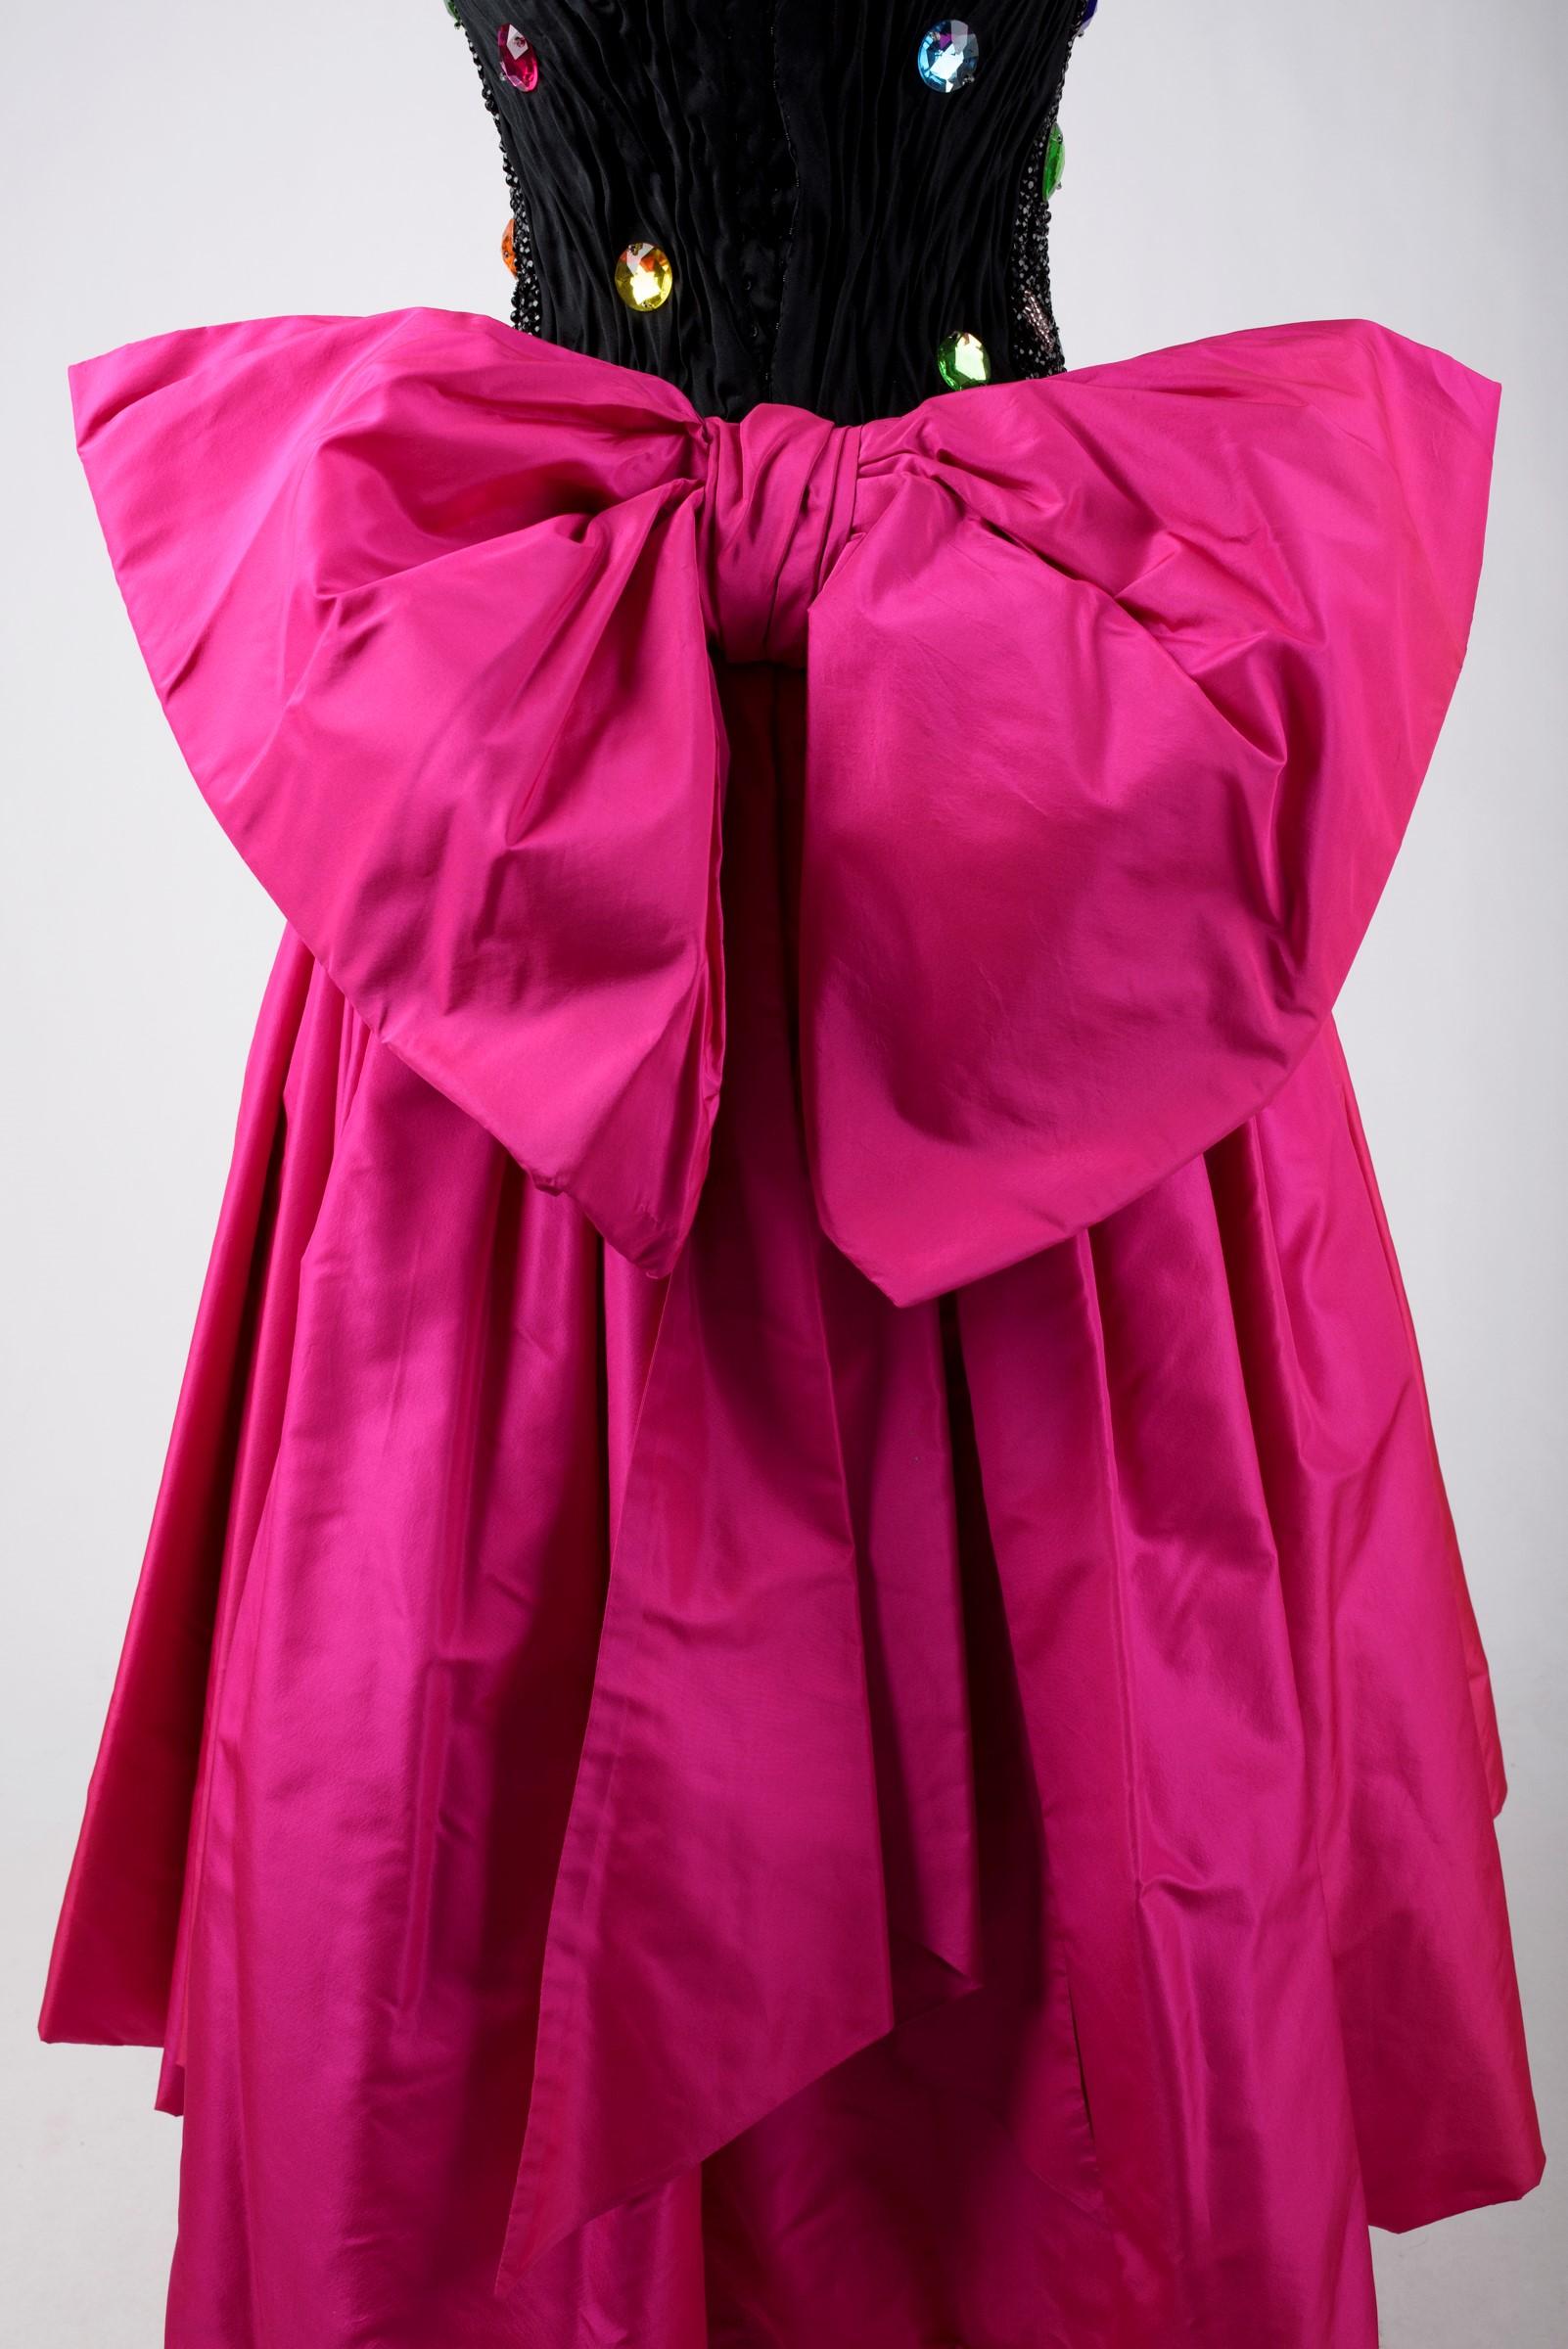 A Louis Féraud Couture Taffeta Evening Dress with beaded Bodice-Fall 1986-1987 For Sale 8